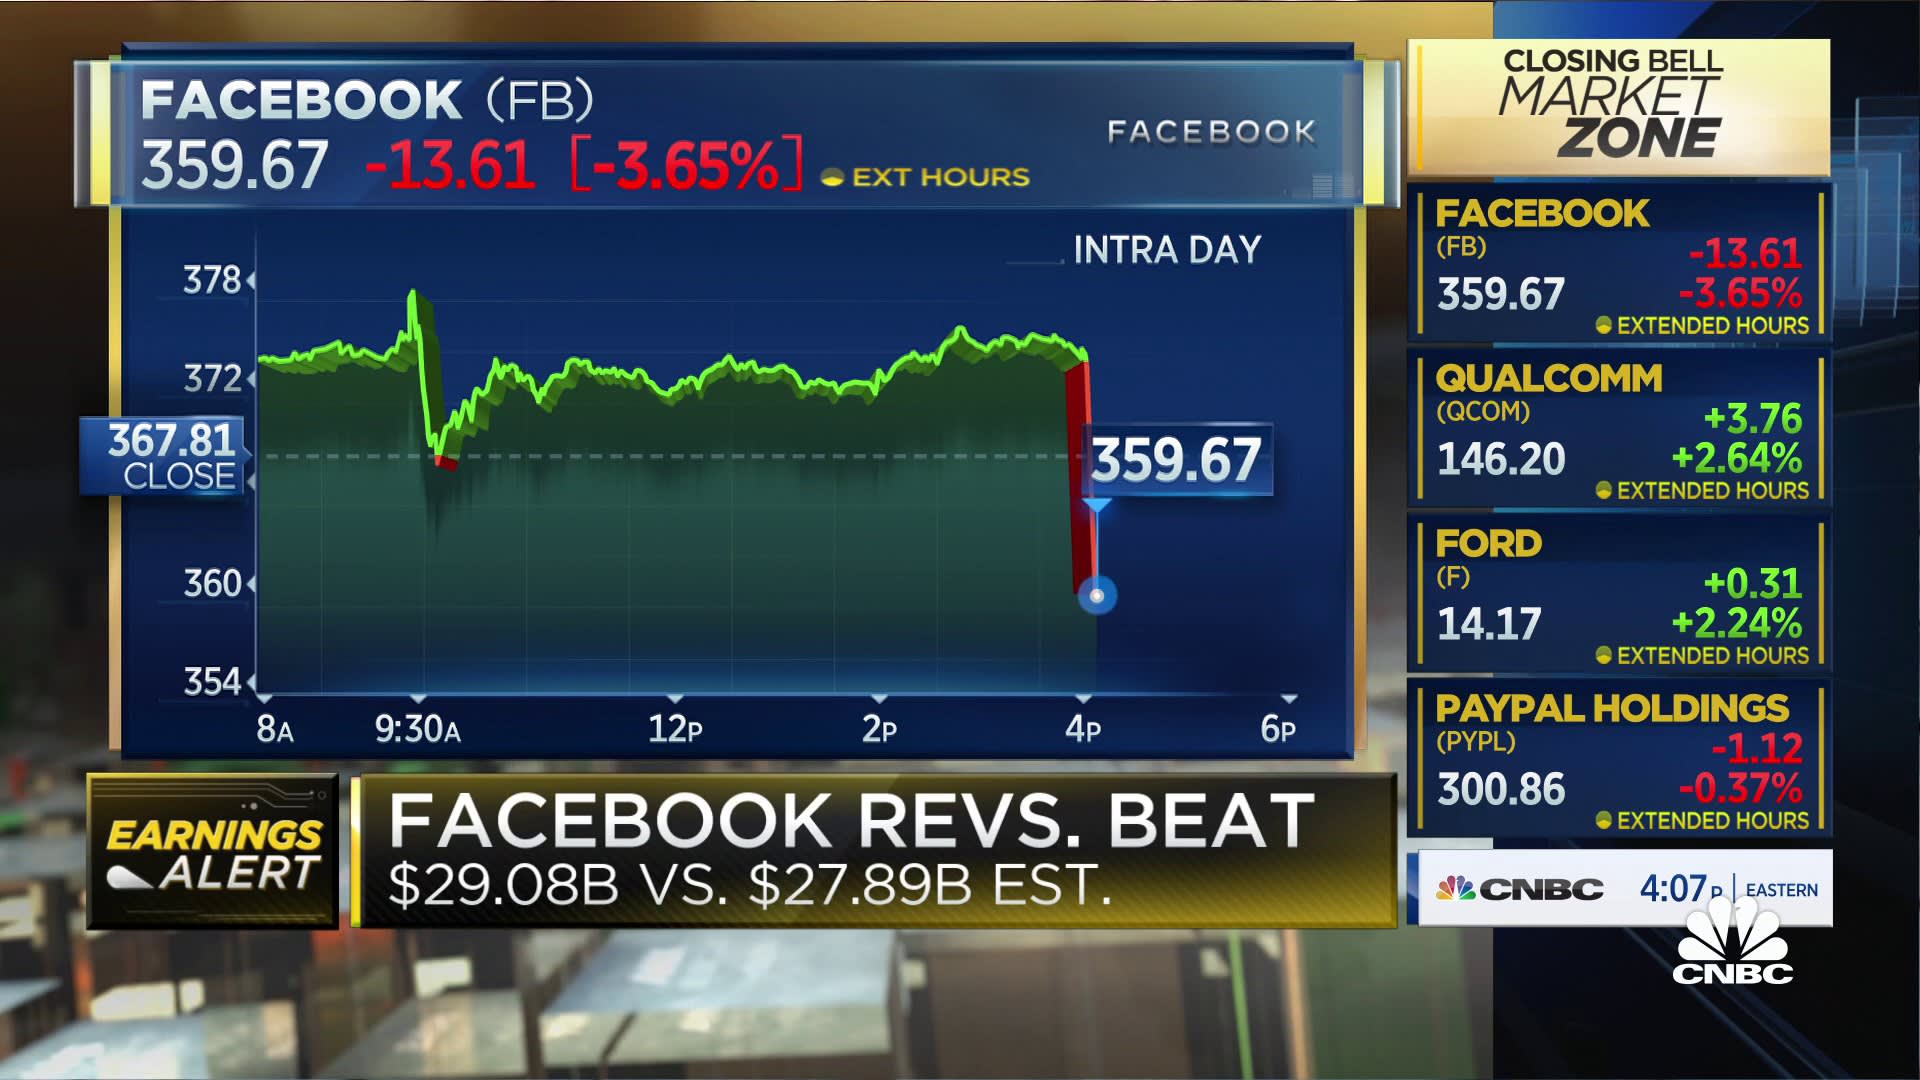 The issue with Facebook is an expectations correction, says Evercore ISI's Mahaney